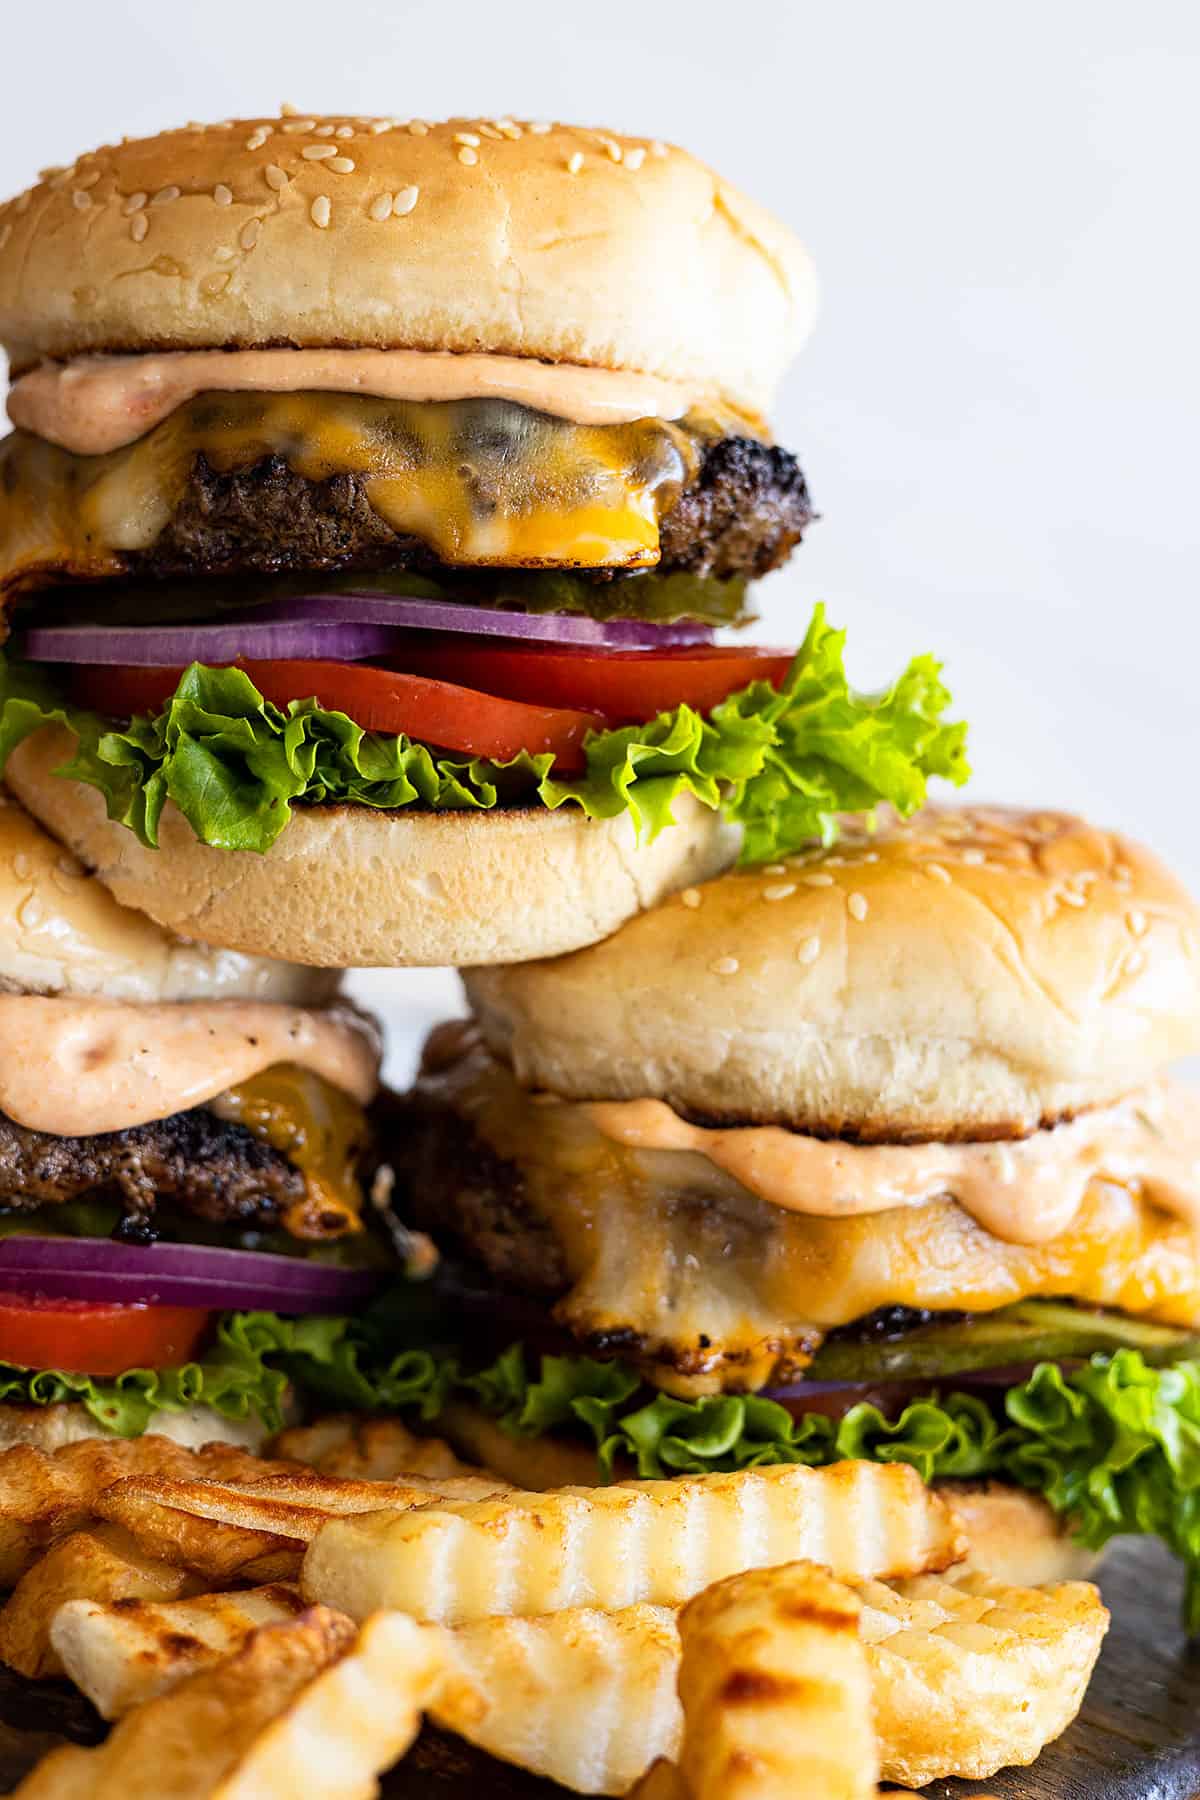 Three burgers stacked topped with toppings and fries scattered around.